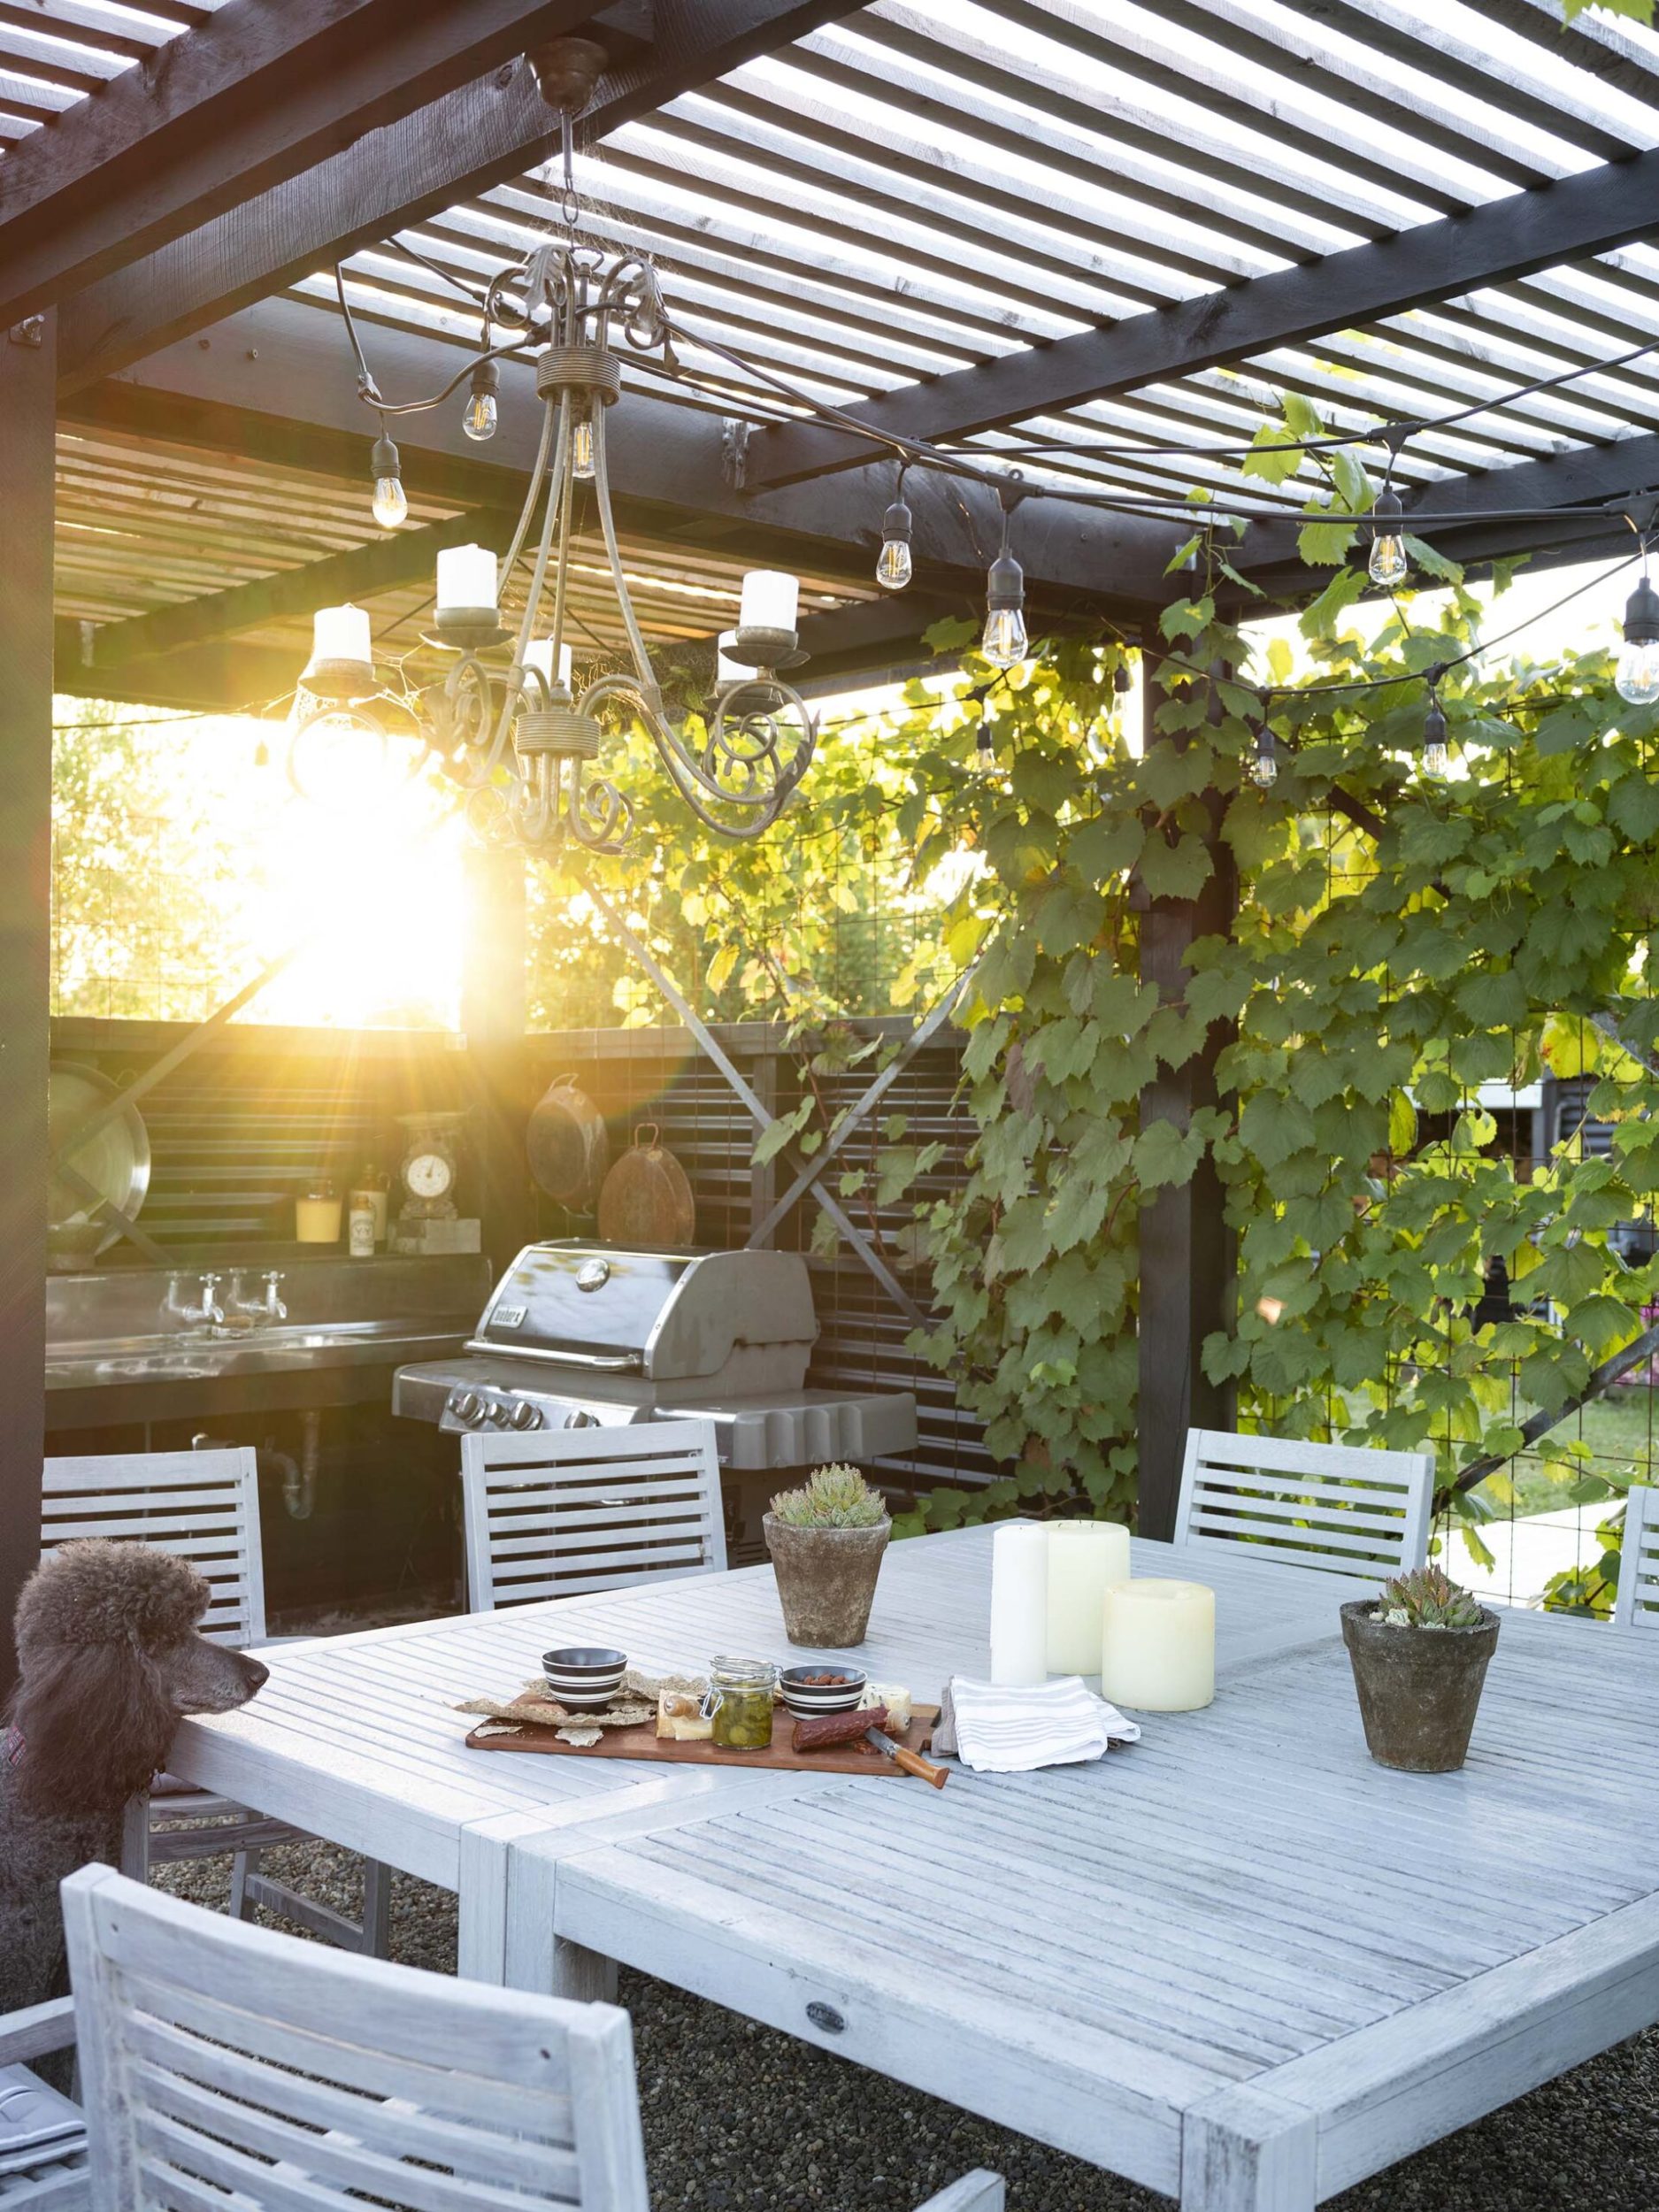 An outdoor kitchen with hanging vines at sunset